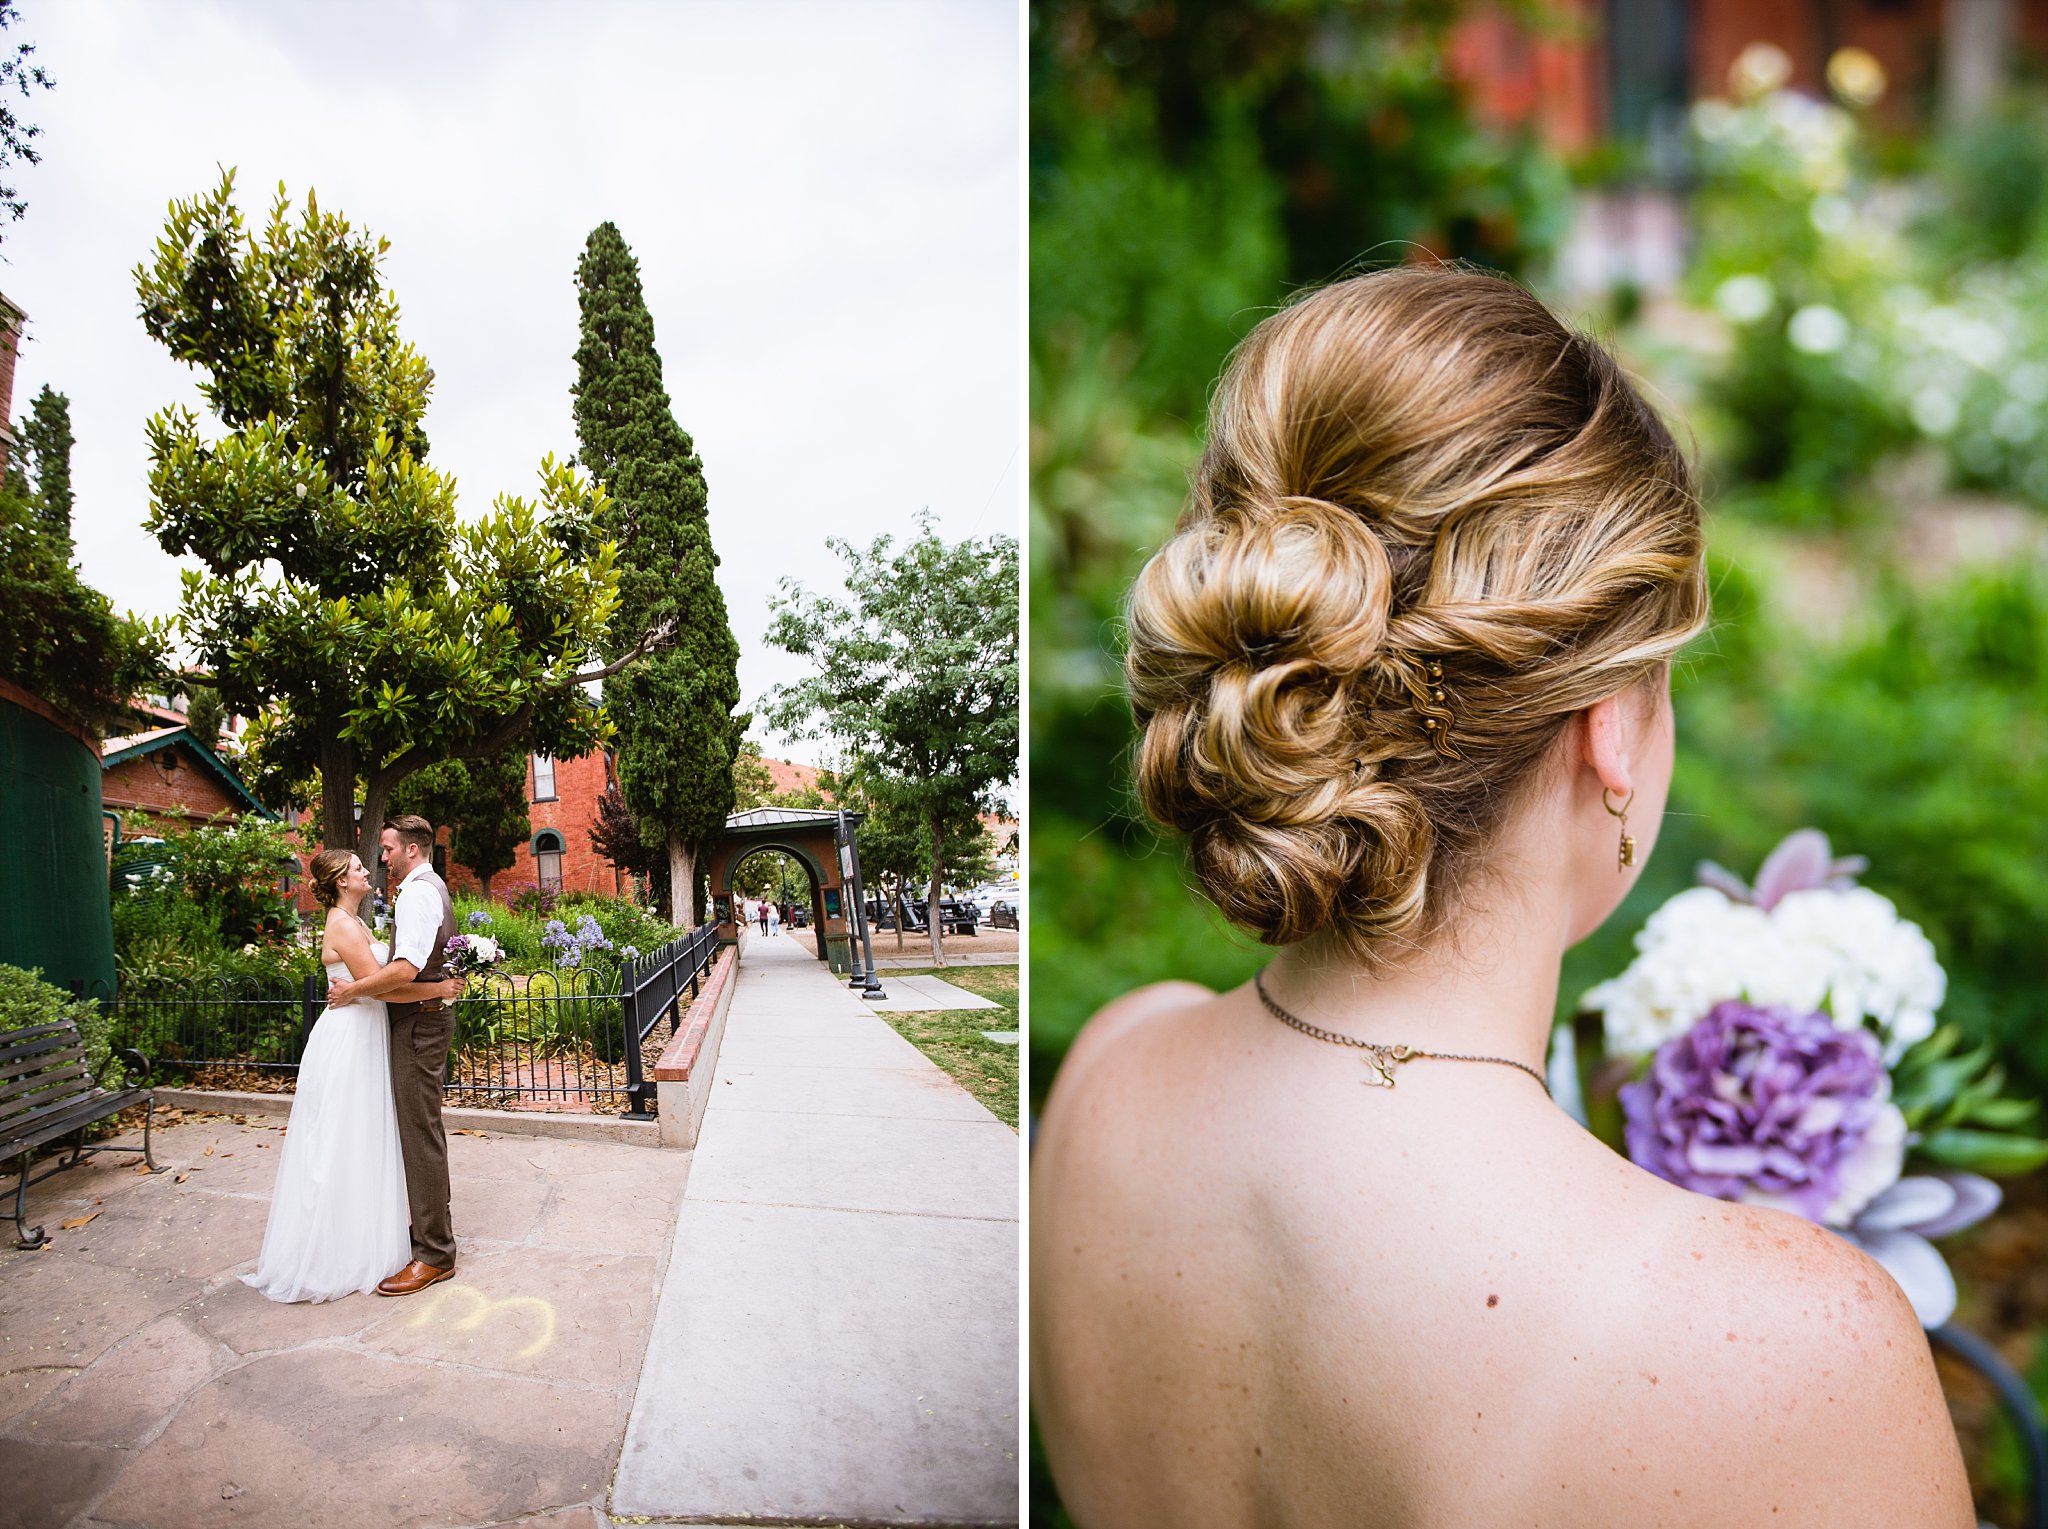 Bride and Groom at a historic garden in Bisbee Arizona by PMA Photography